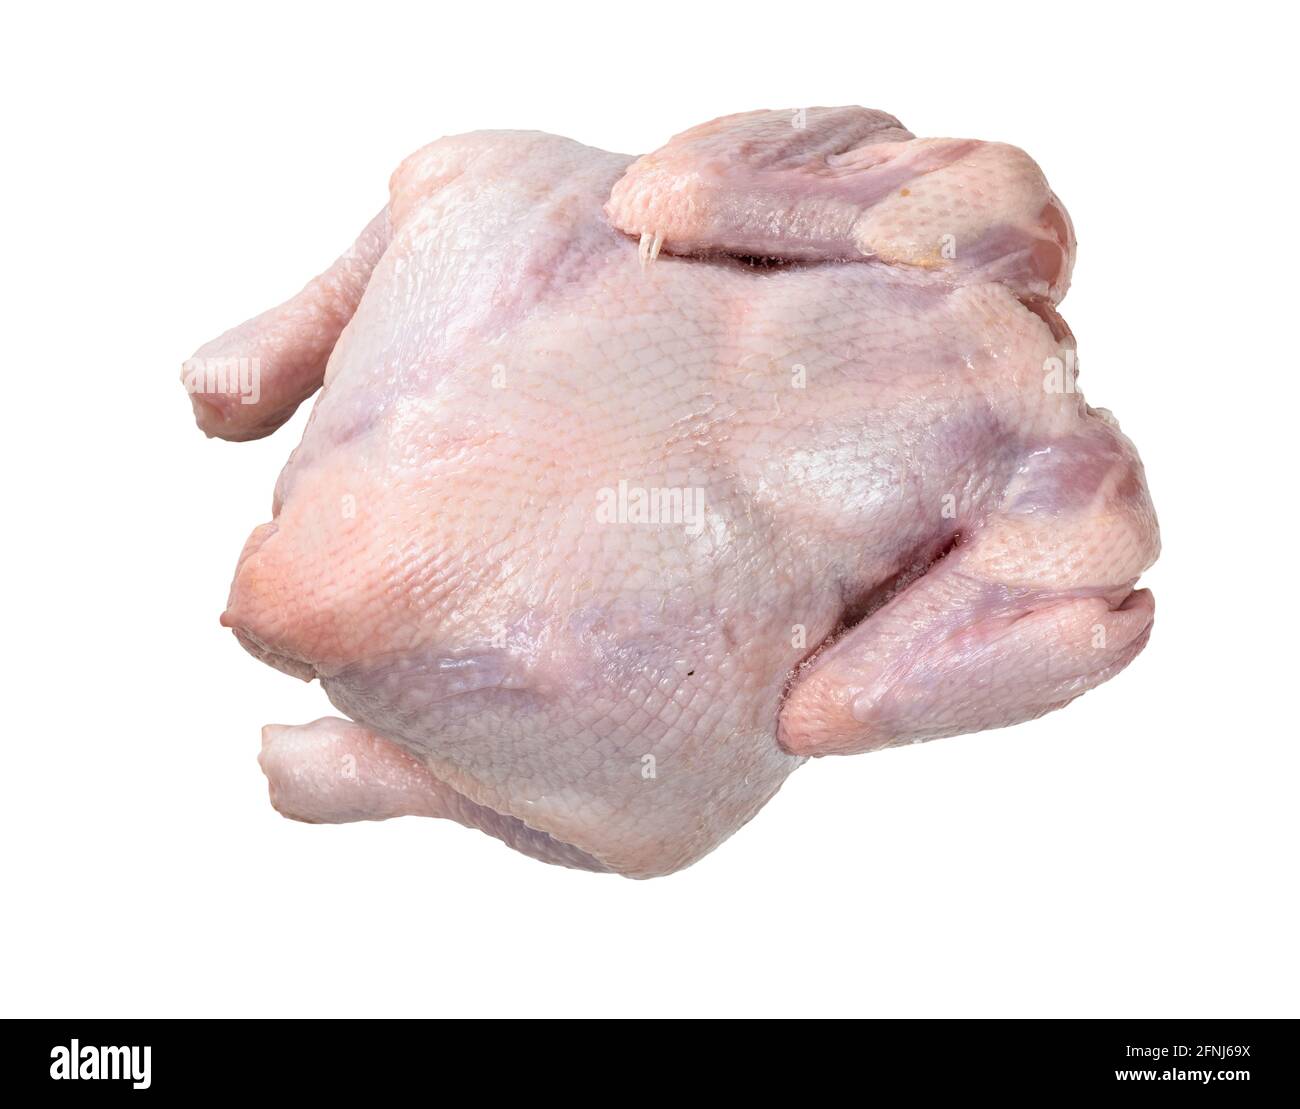 whole air chilled uncooked chicken cutout on white background Stock Photo